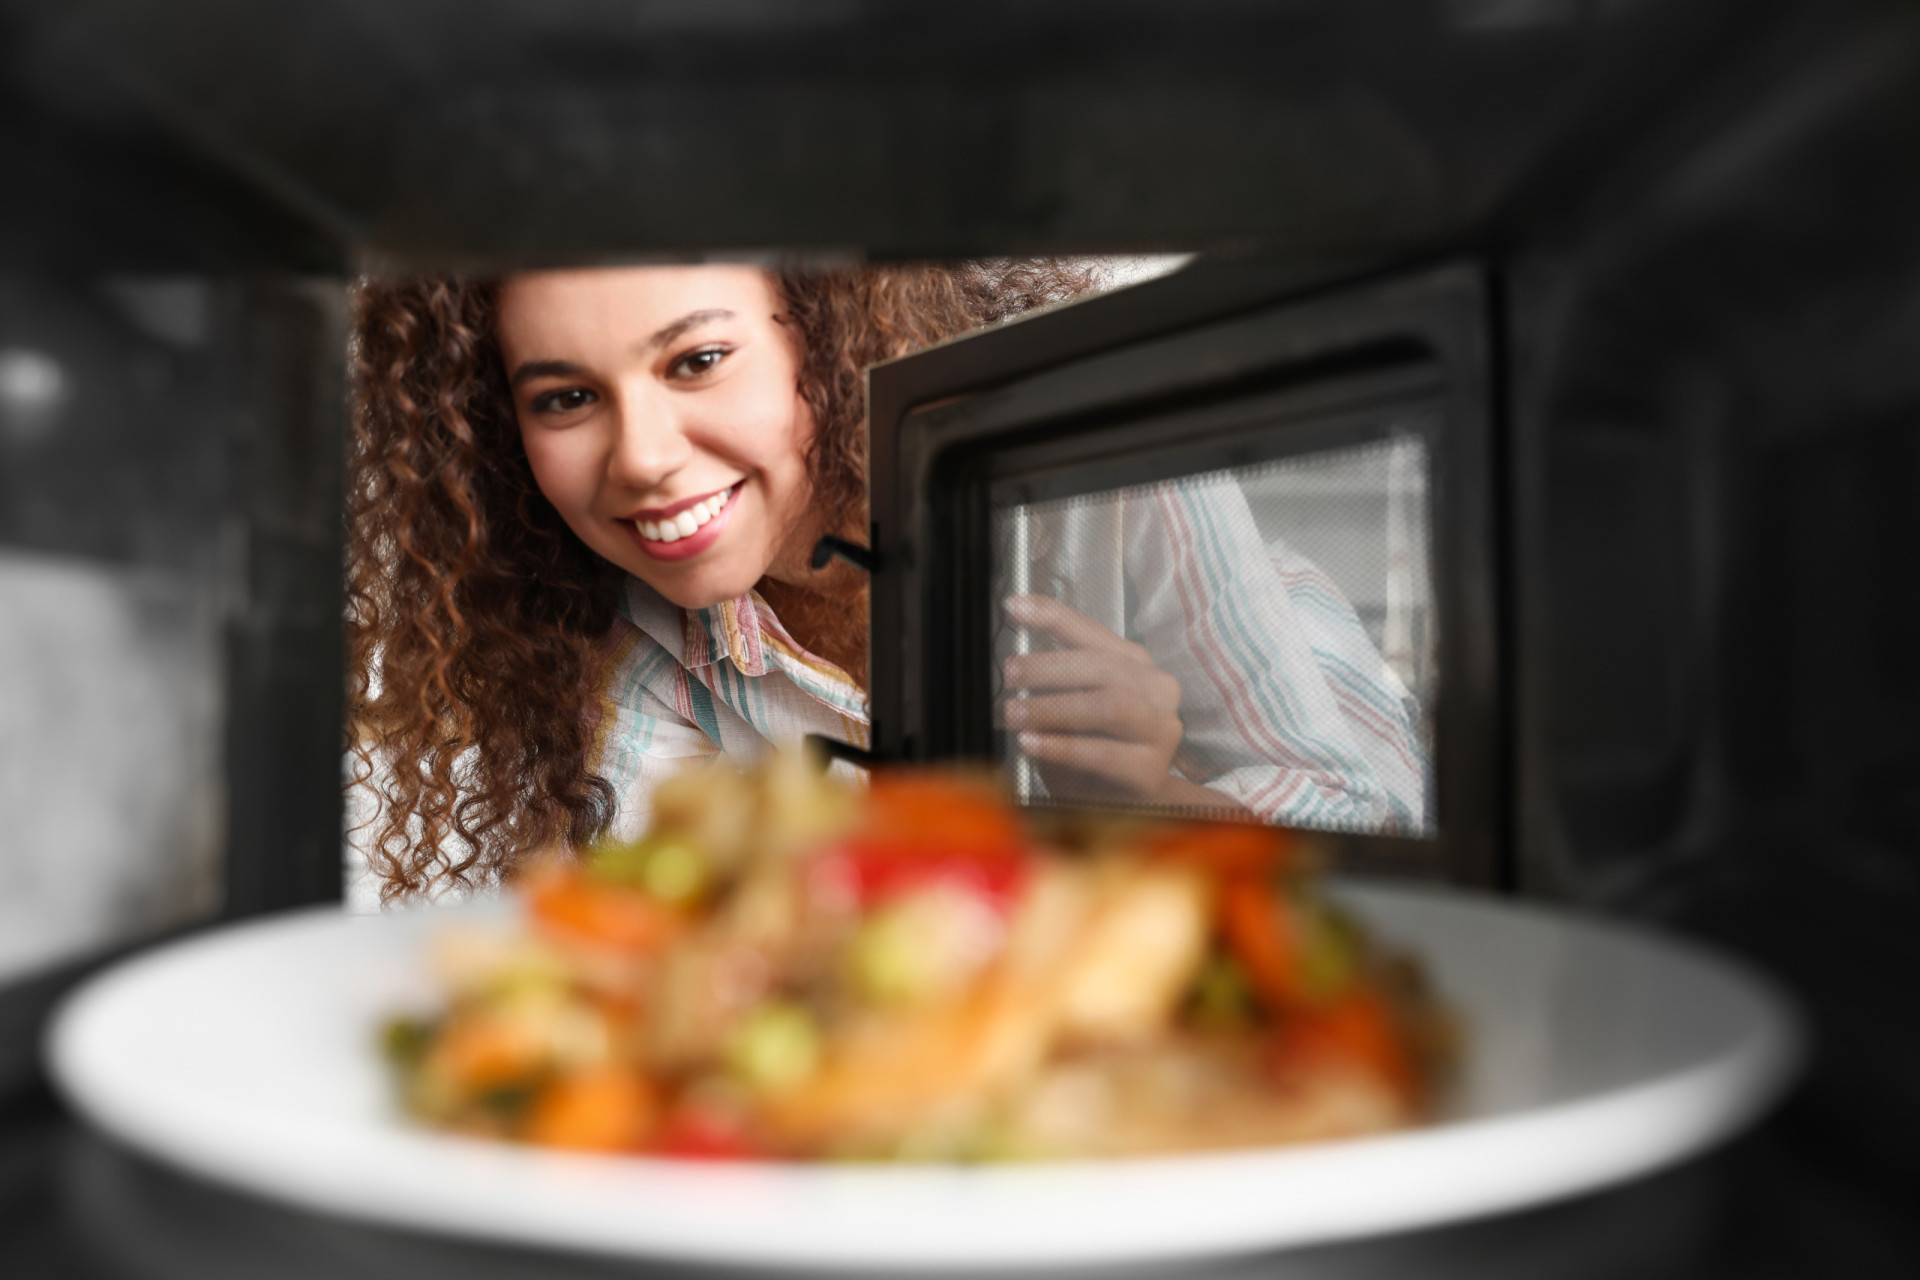 <p>Microwaves are one of the most popular and well-known electromagnetic waves, ever since their convenient cooking capabilities were widely utilized in the 1970s. They're also used by meteorologists around the world to track weather movements.</p><p>You may also like:<a href="https://www.starsinsider.com/n/349565?utm_source=msn.com&utm_medium=display&utm_campaign=referral_description&utm_content=550315en-us"> Celebrity siblings that fame forgot</a></p>